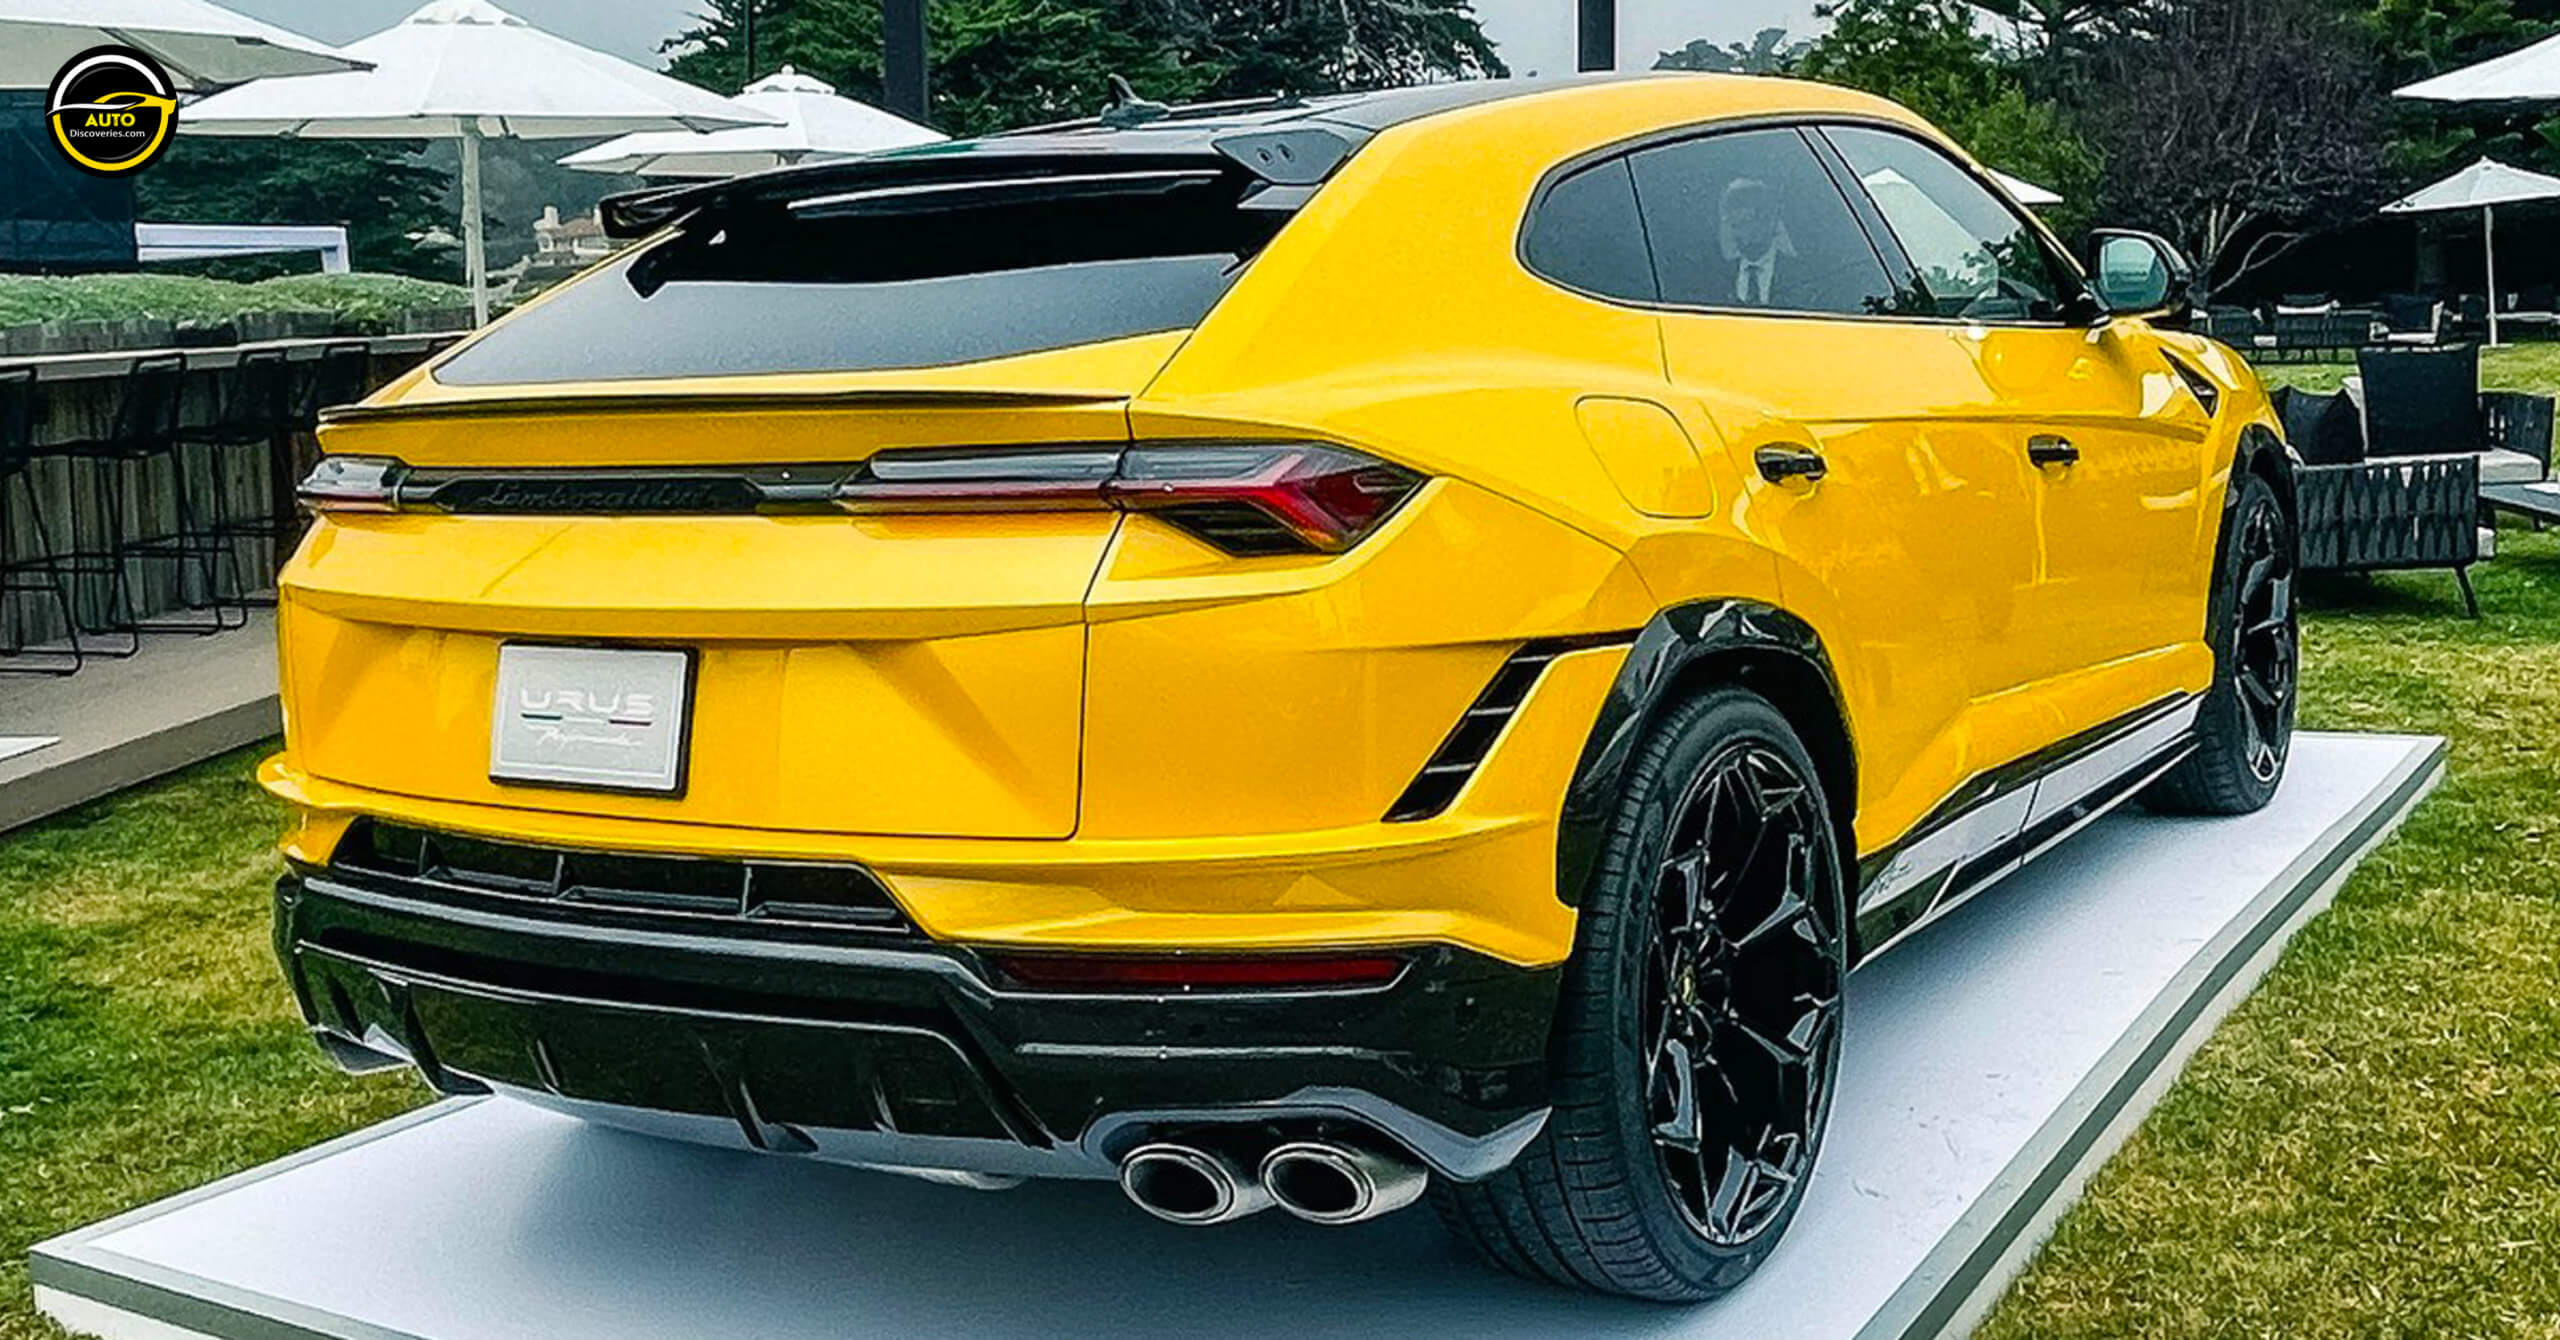 2023 Urus With 657 Horsepower, BEAST! Auto Discoveries